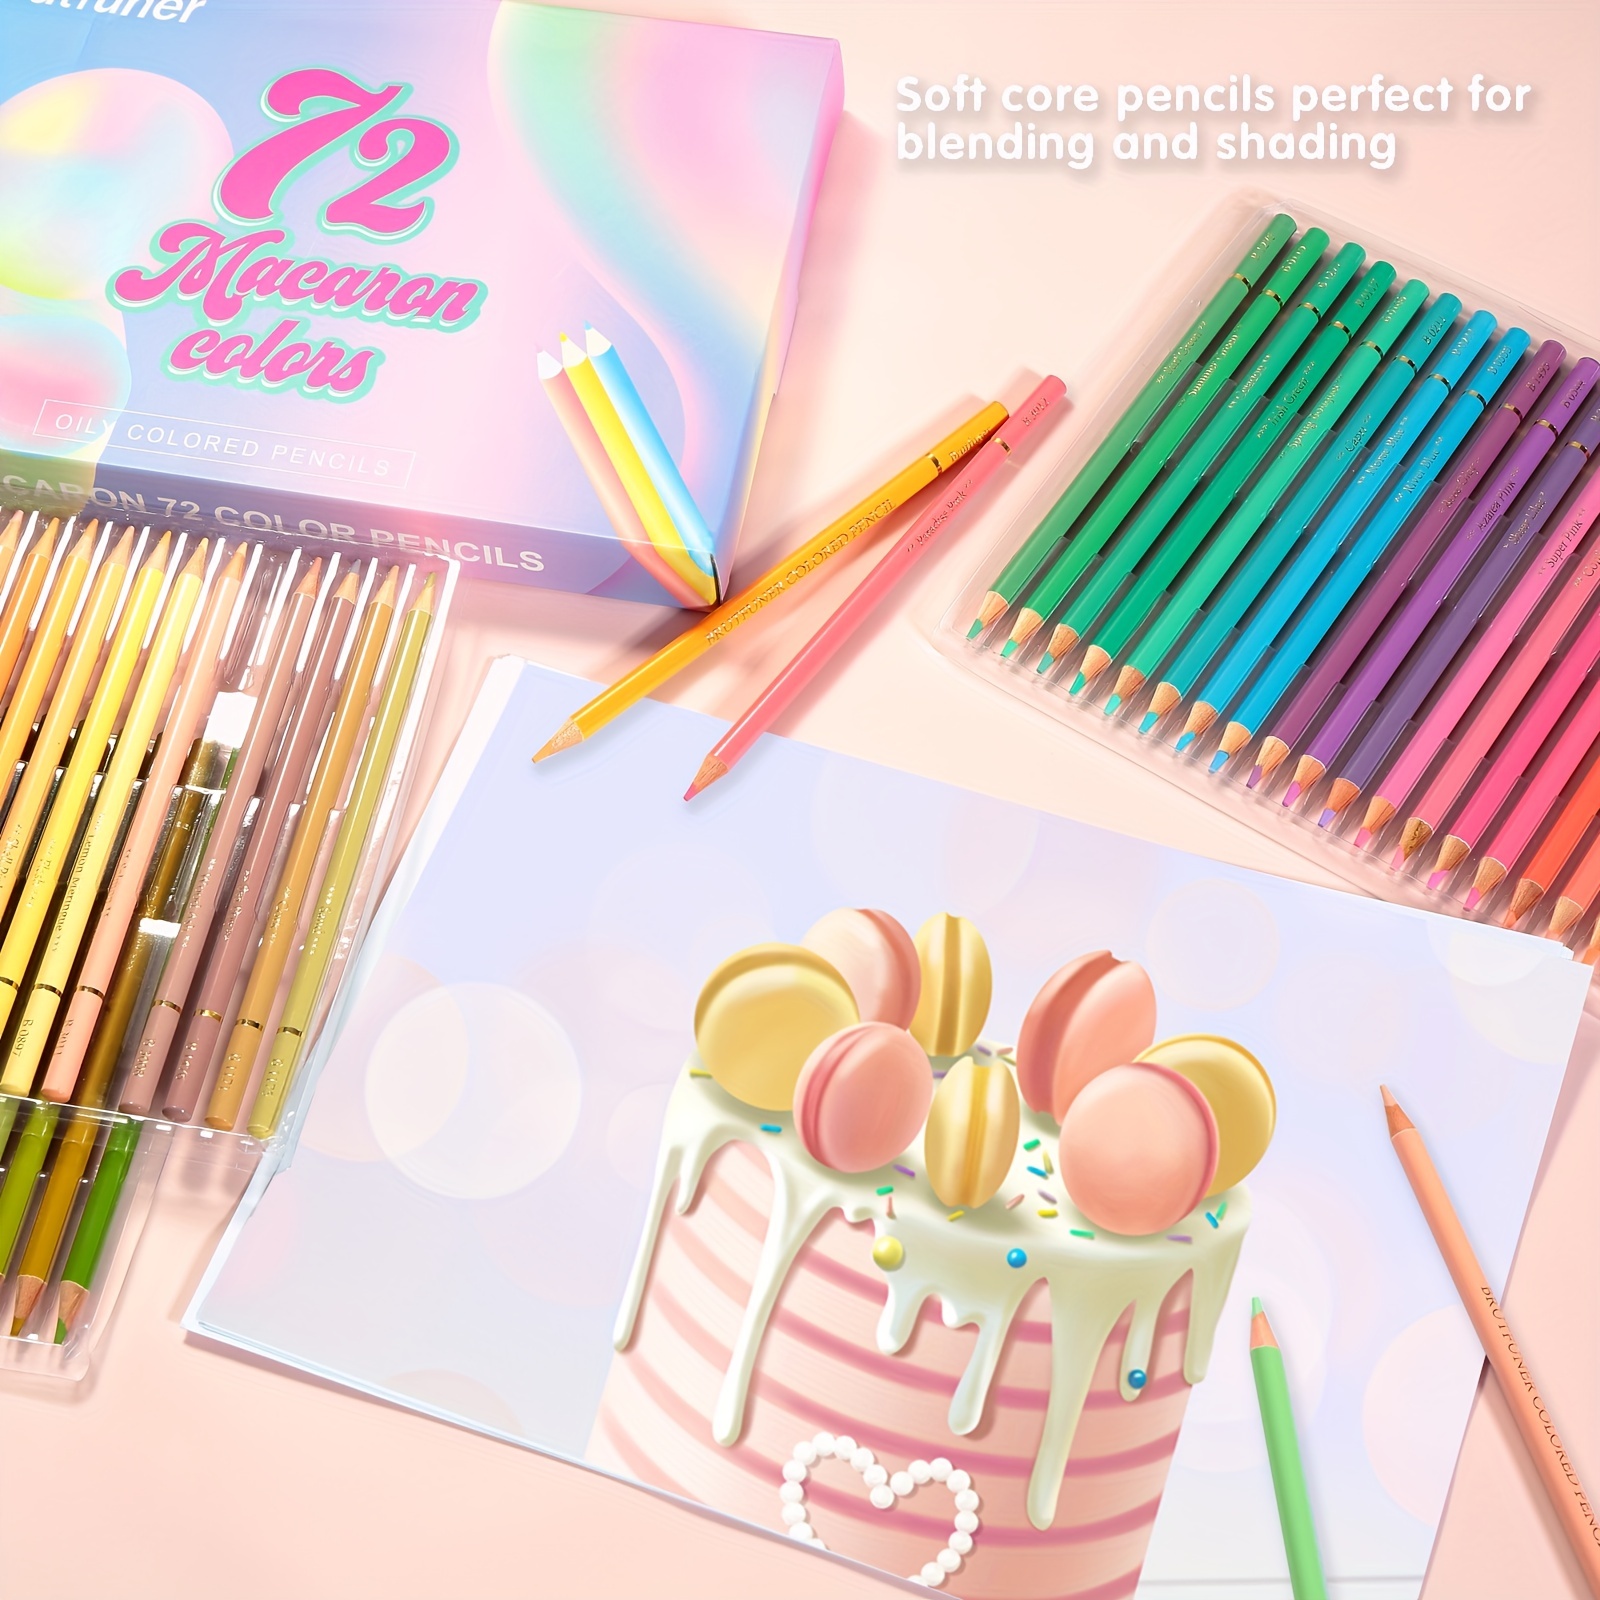  Gimue Macaron 72 Pastel Colored Pencils Set, Professional Soft  Core Coloring Pencils for Adult Coloring Books, Premium Art Drawing Pencils  for Shading Kids Sketching Drawing Beginners… : Arts, Crafts & Sewing